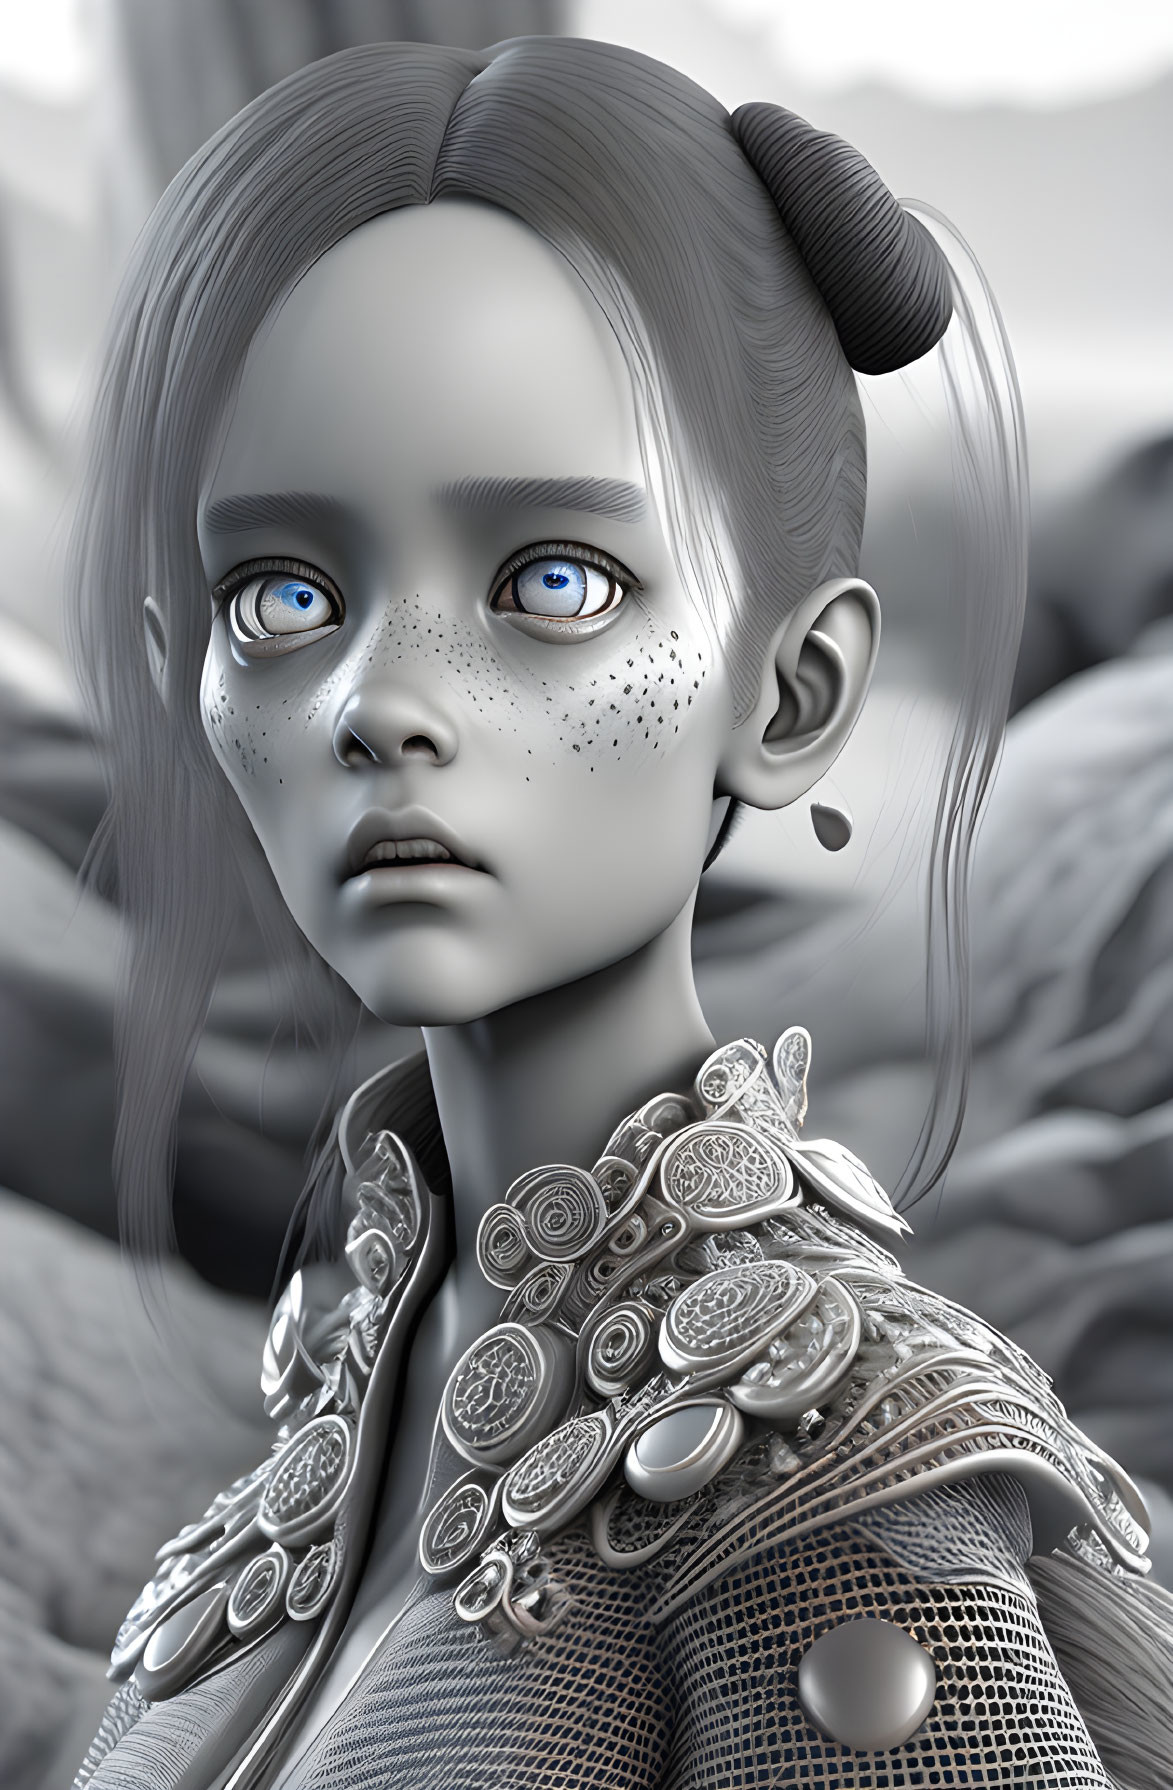 Monochrome portrait of a girl with blue eyes, freckles, twin buns, and intricate